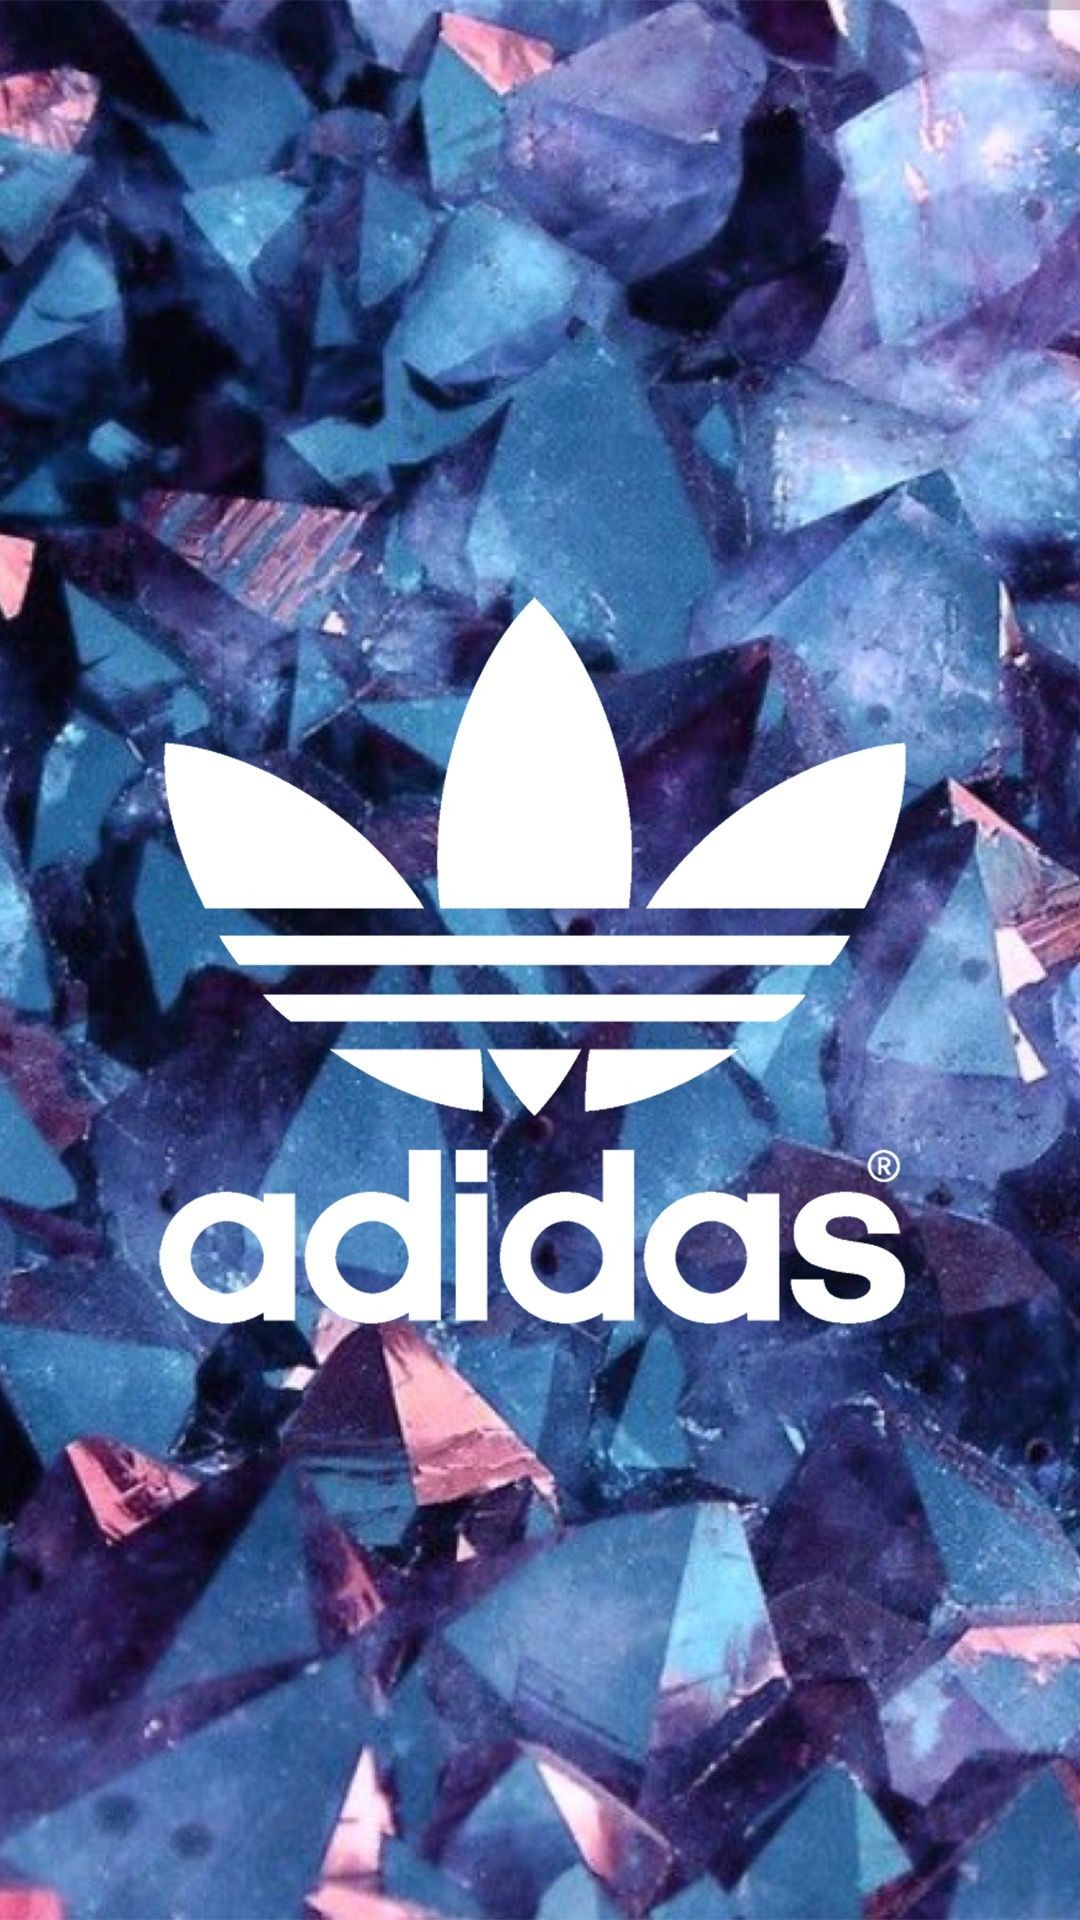 adidas backgrounds for iphone